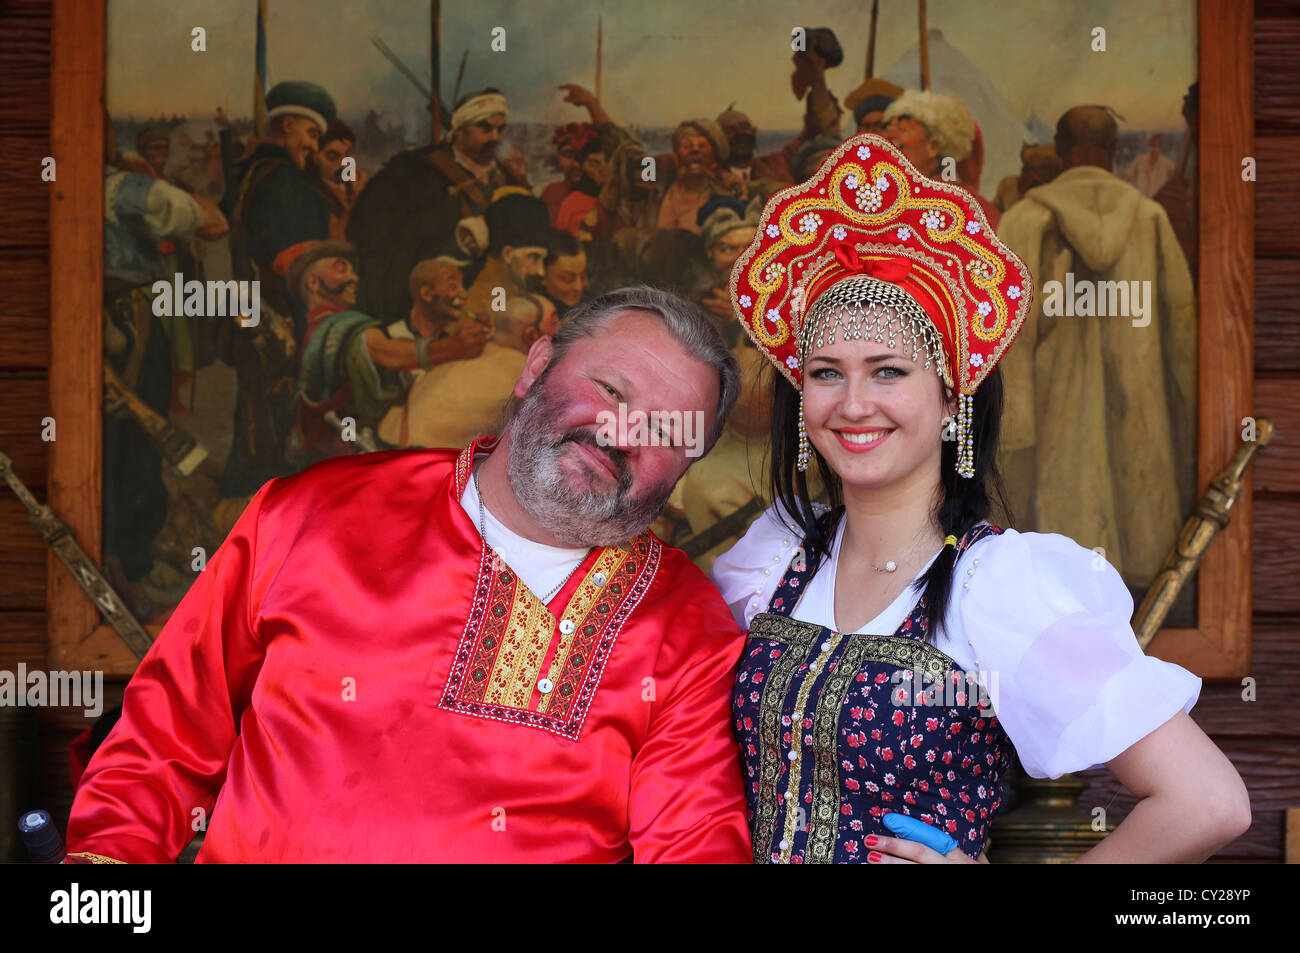 Ukrainian people wearing Ukrainian traditional clothing which contains elements of Ukrainian ethnic embroidery. Stock Photo